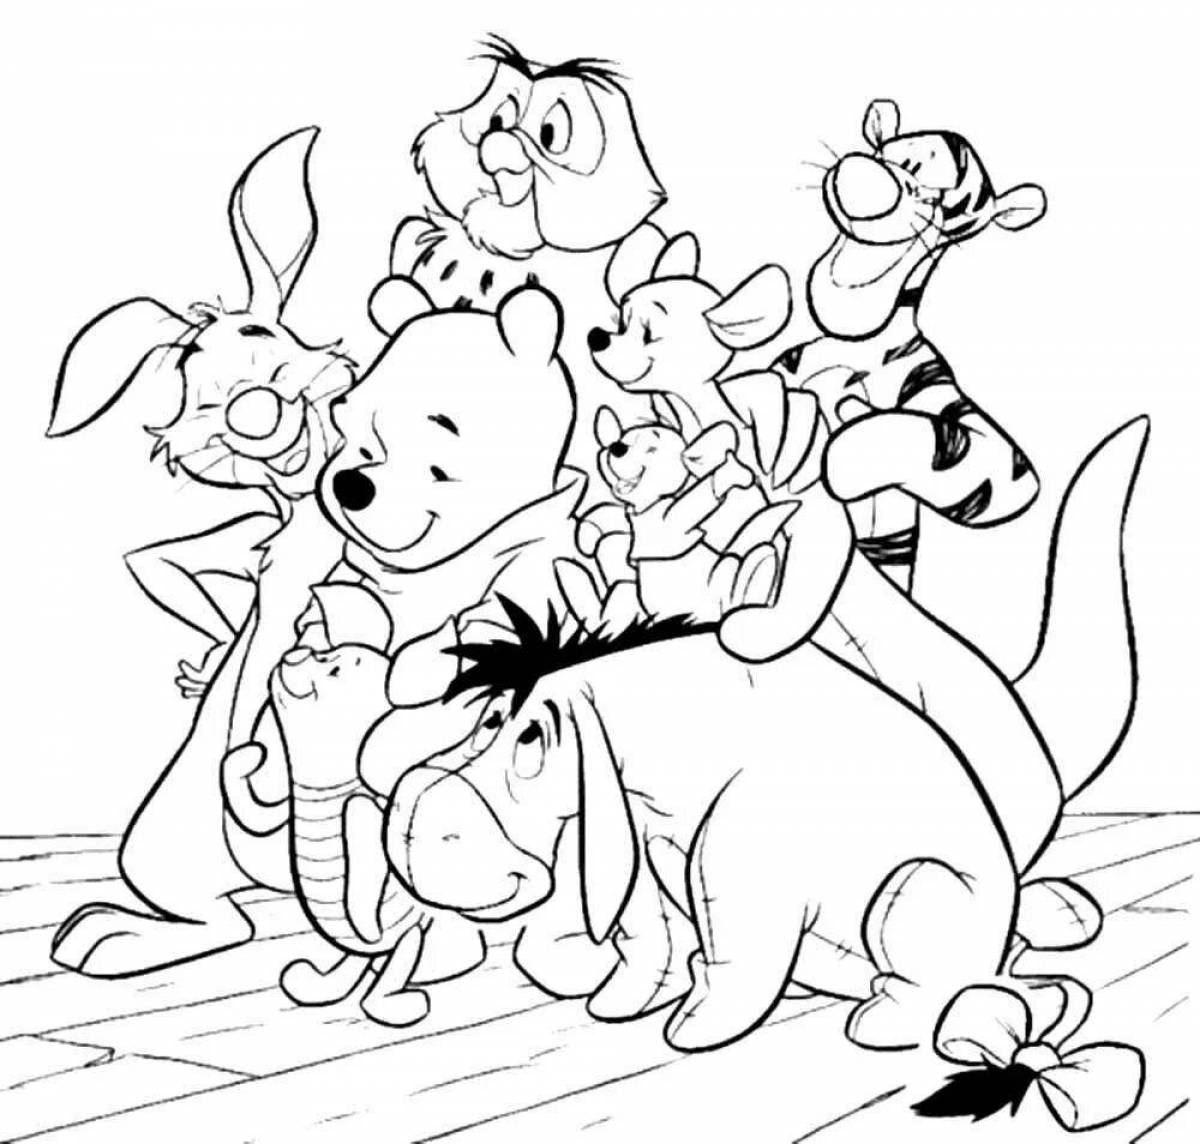 Wonderful disney character coloring pages